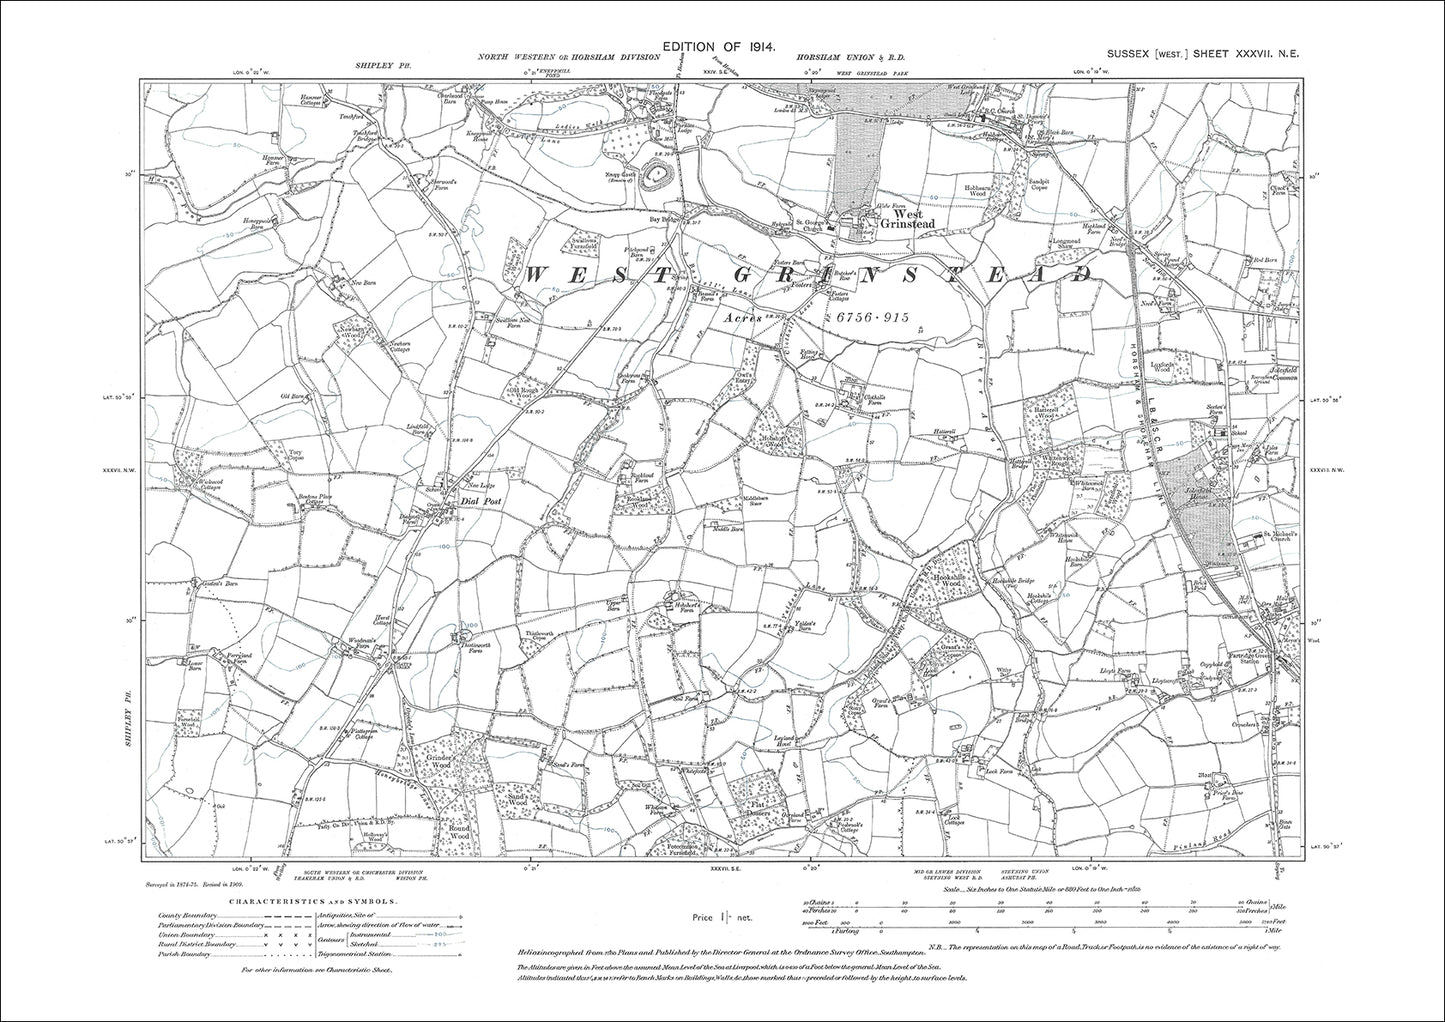 West Grinstead, Partridge Green (west), Dial Post, old map Sussex 1914: 37NE